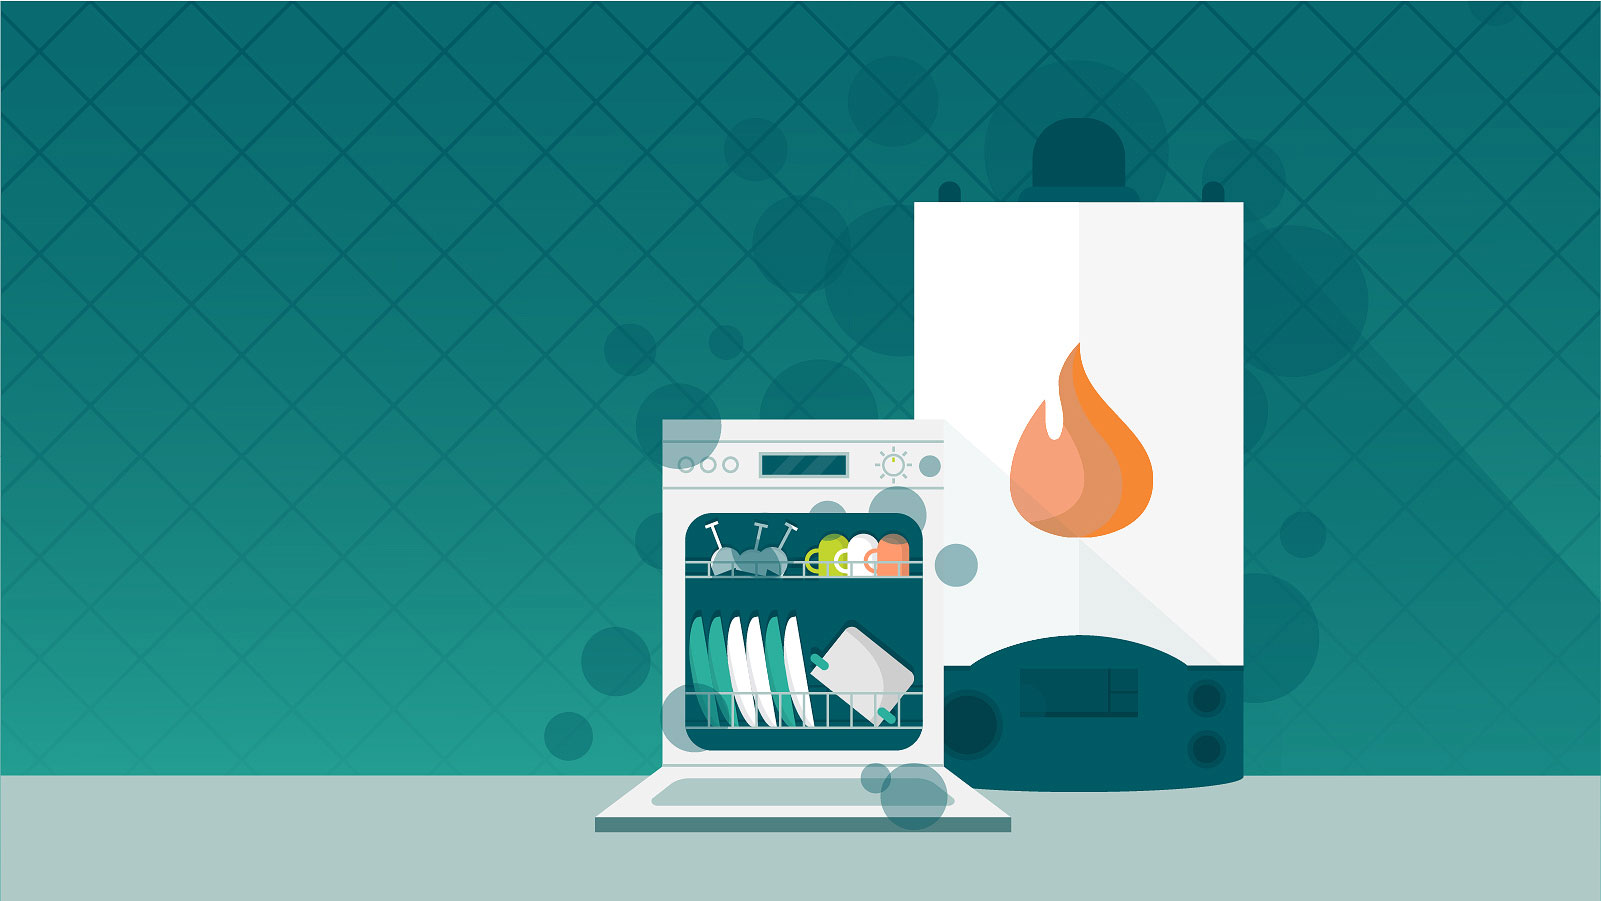 Graphic image of a furnace and dishwasher on a teal background. 